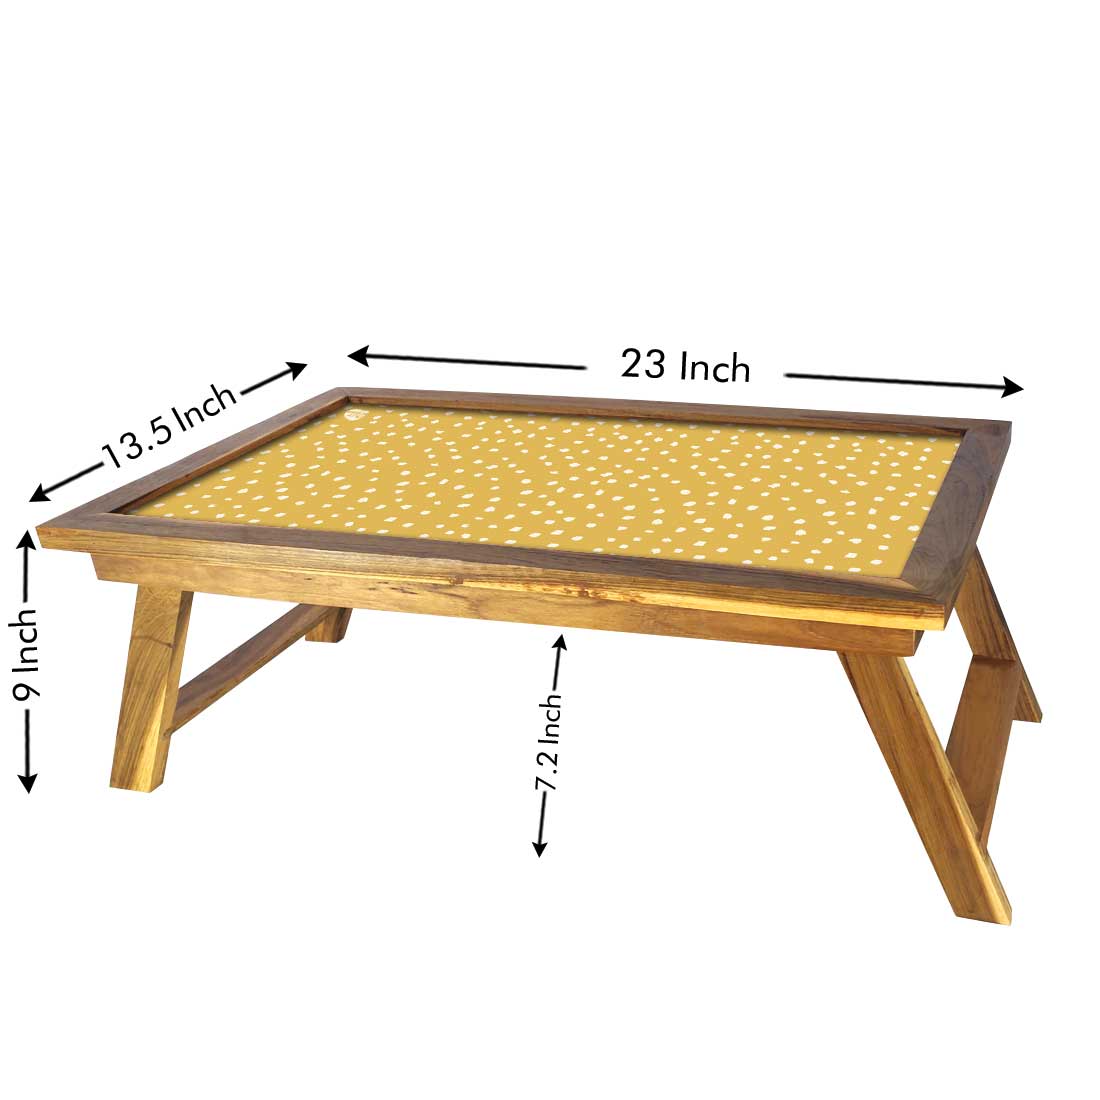 Nutcase Folding Laptop Table For Home Bed Lapdesk Breakfast Table Foldable Teak Wooden Study Desk - Yellow White Dots Nutcase